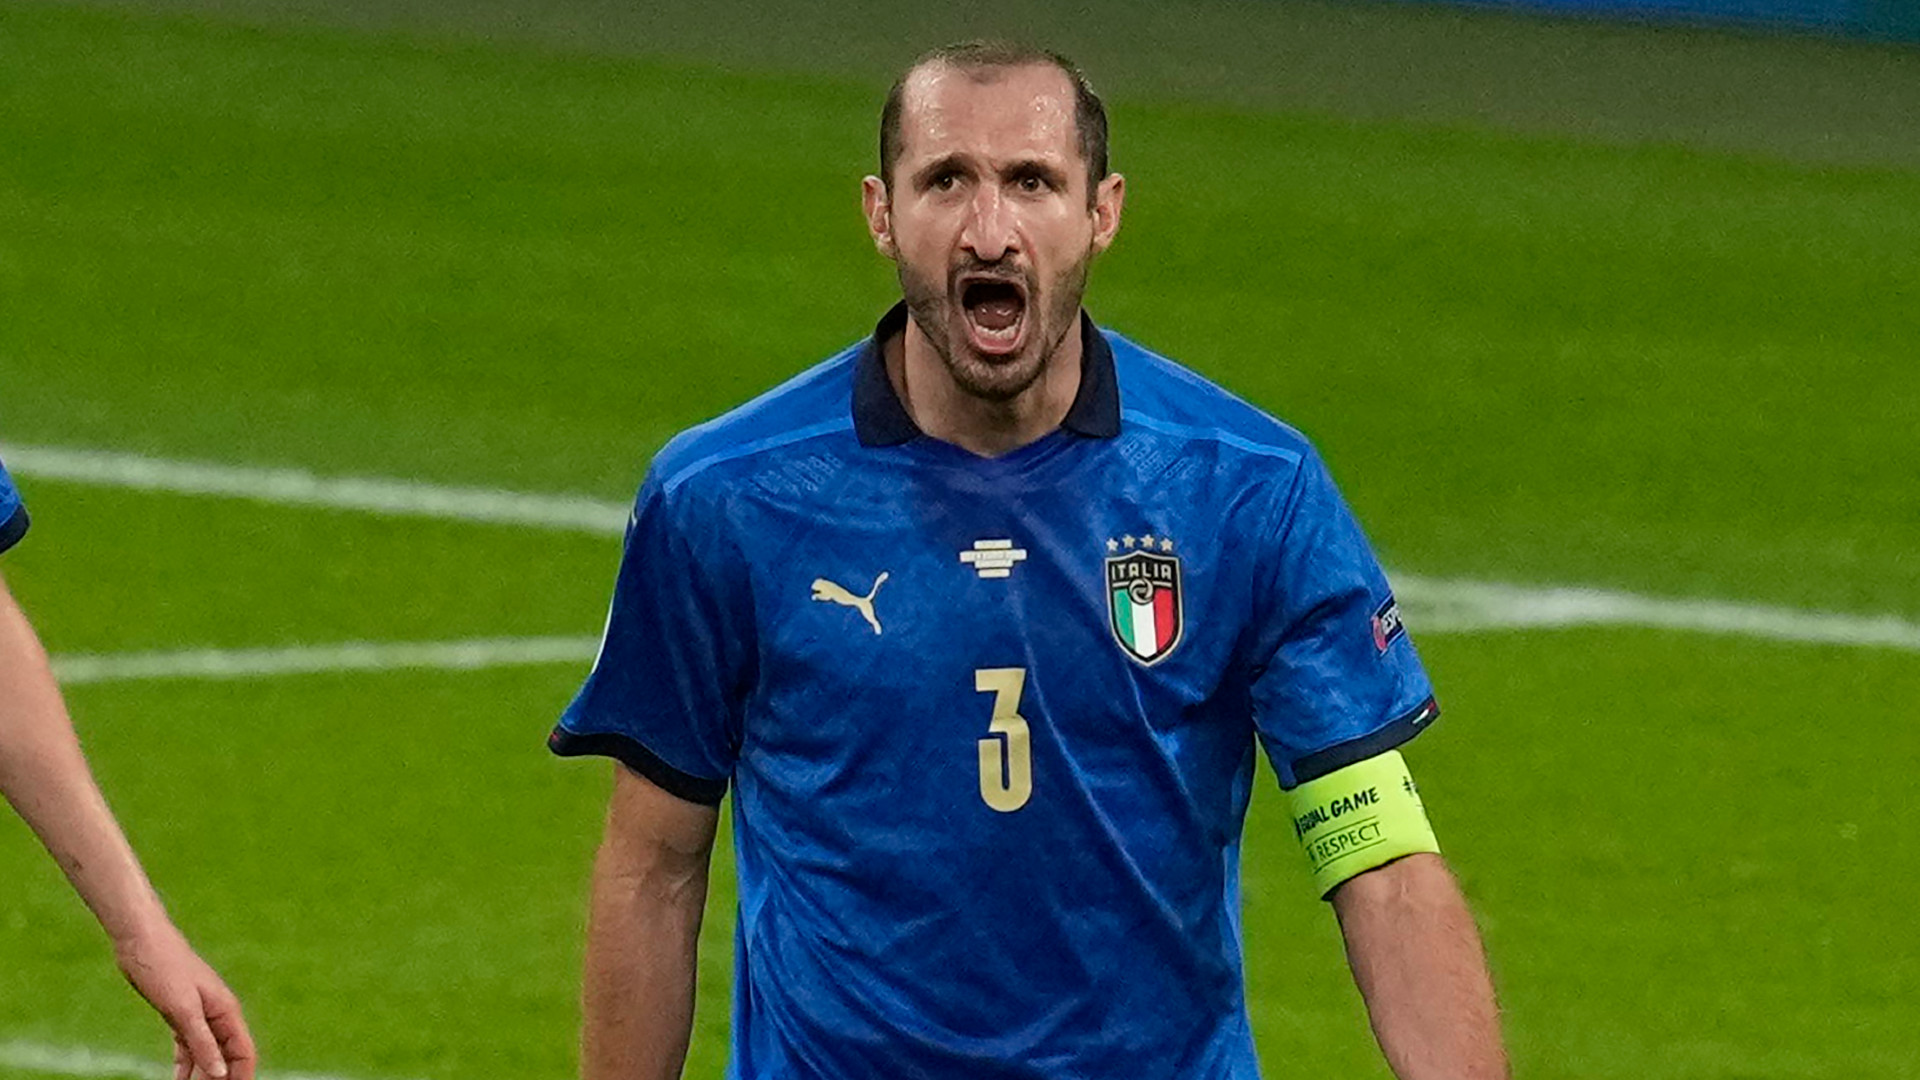 'I want to lift some more trophies' - Chiellini set to re-sign for Juve as Italy star confirms imminent return to Turin